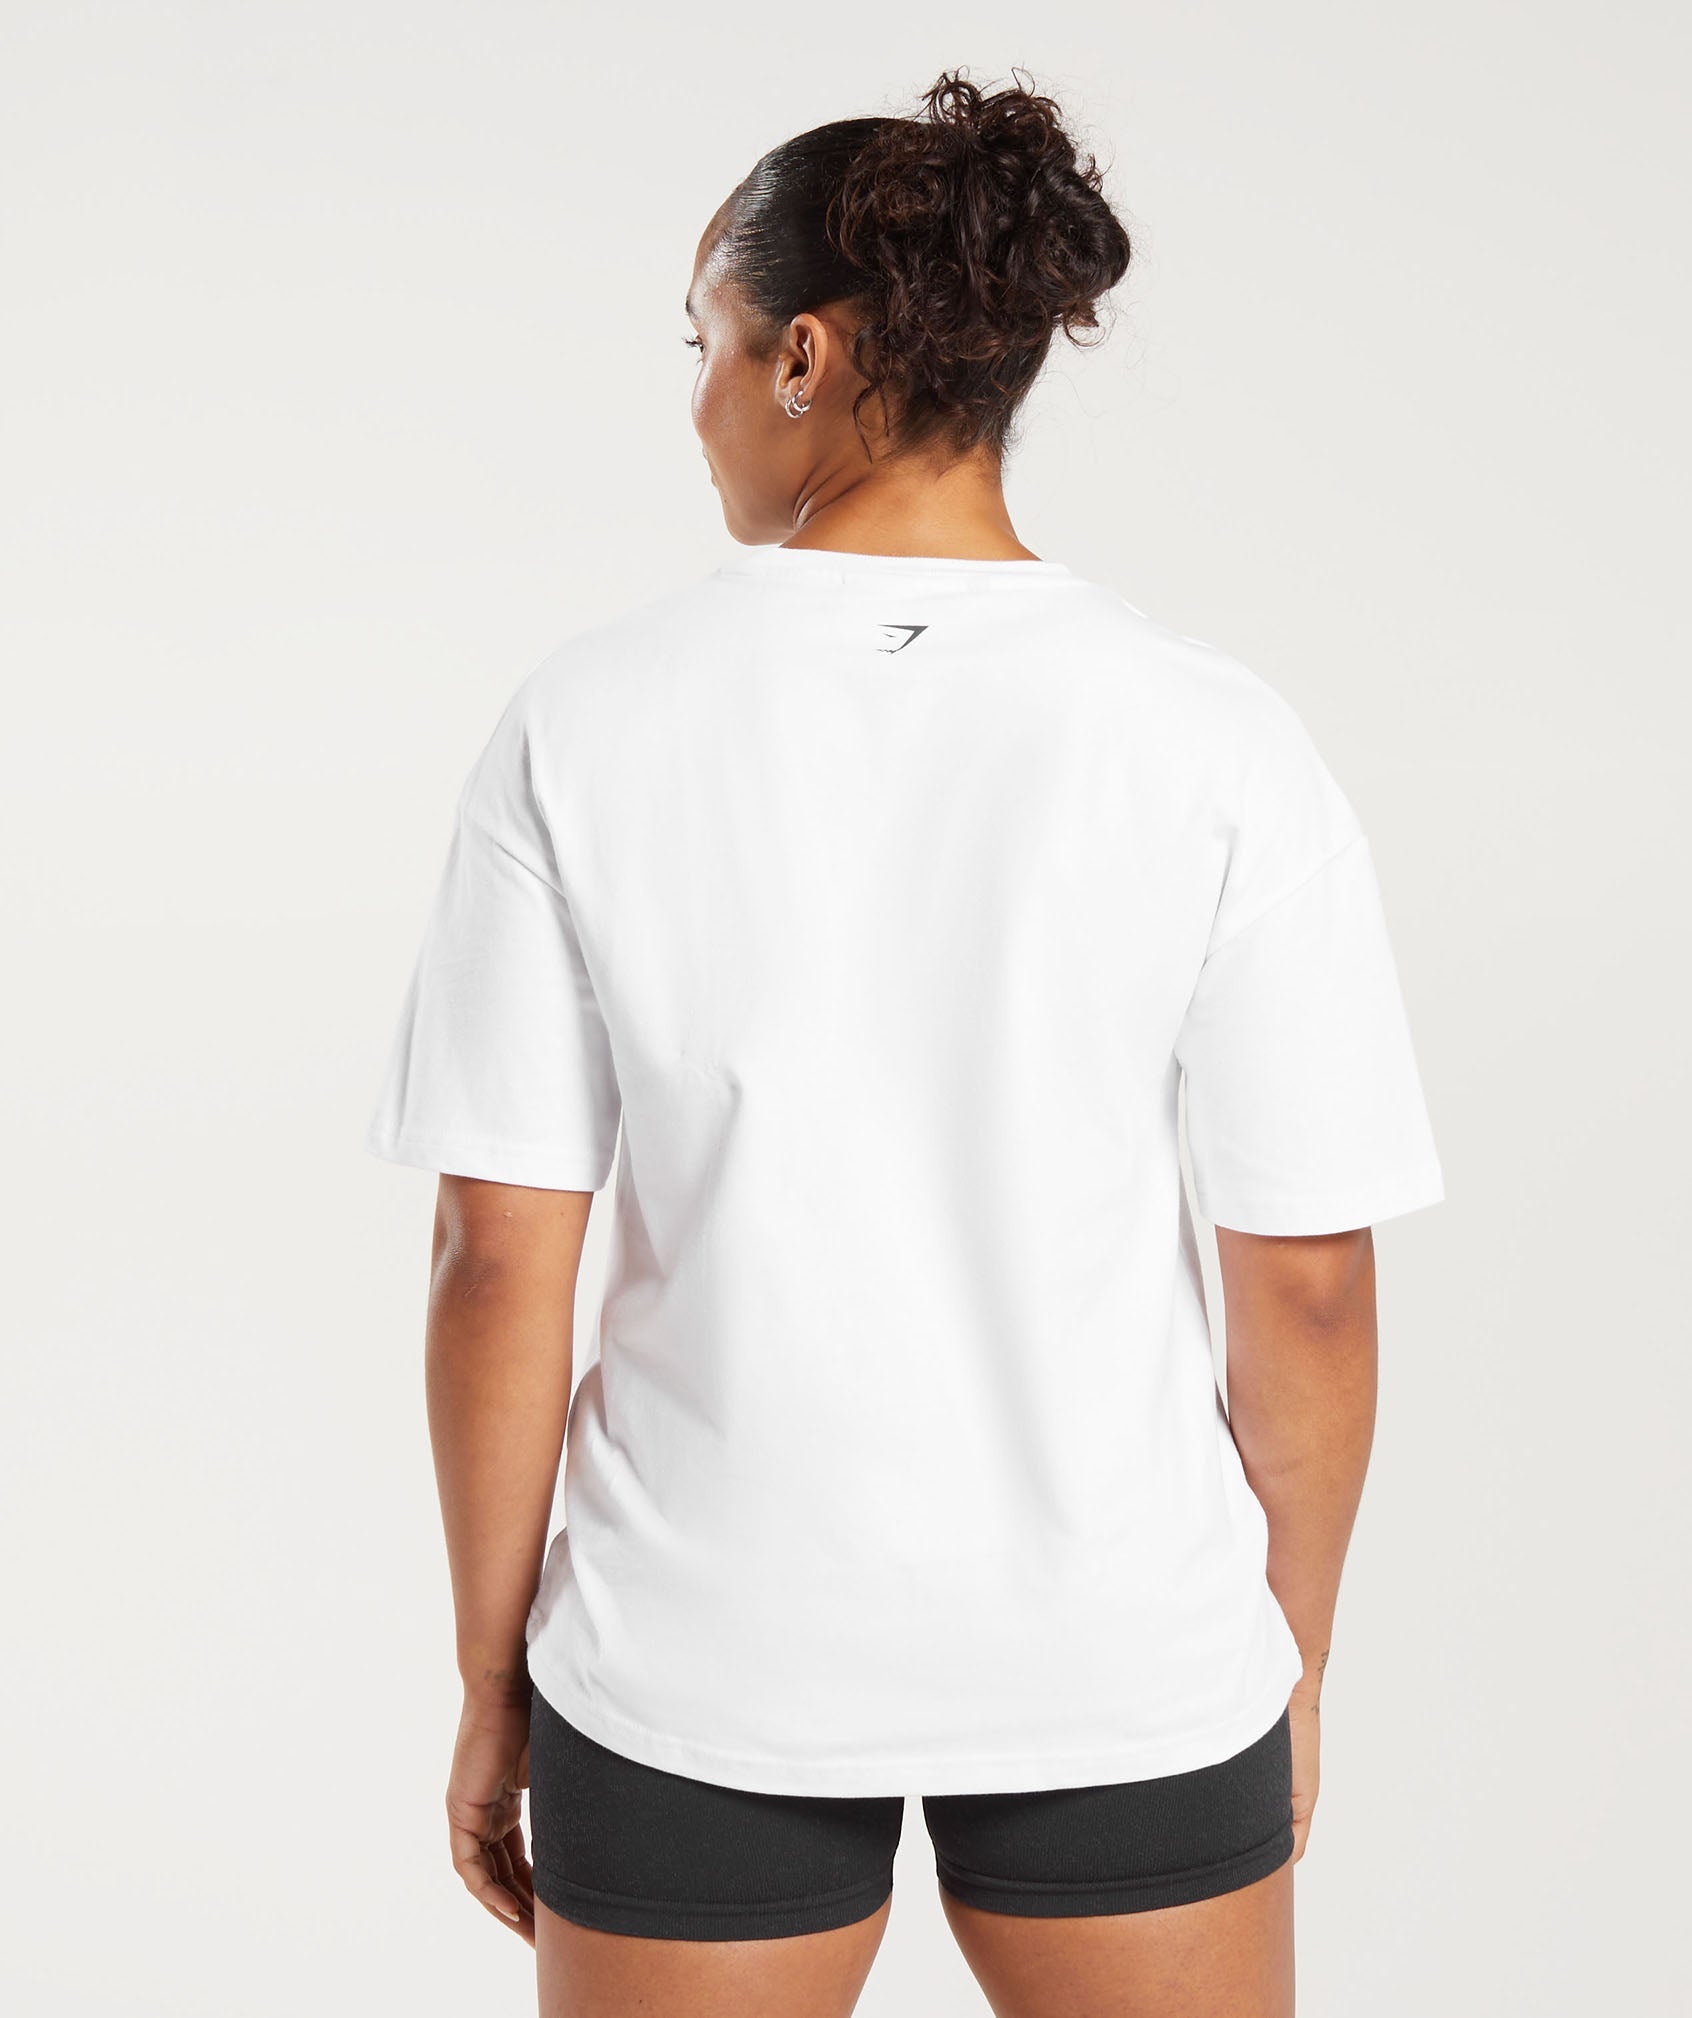 Committed To The Craft T-Shirt in White - view 2